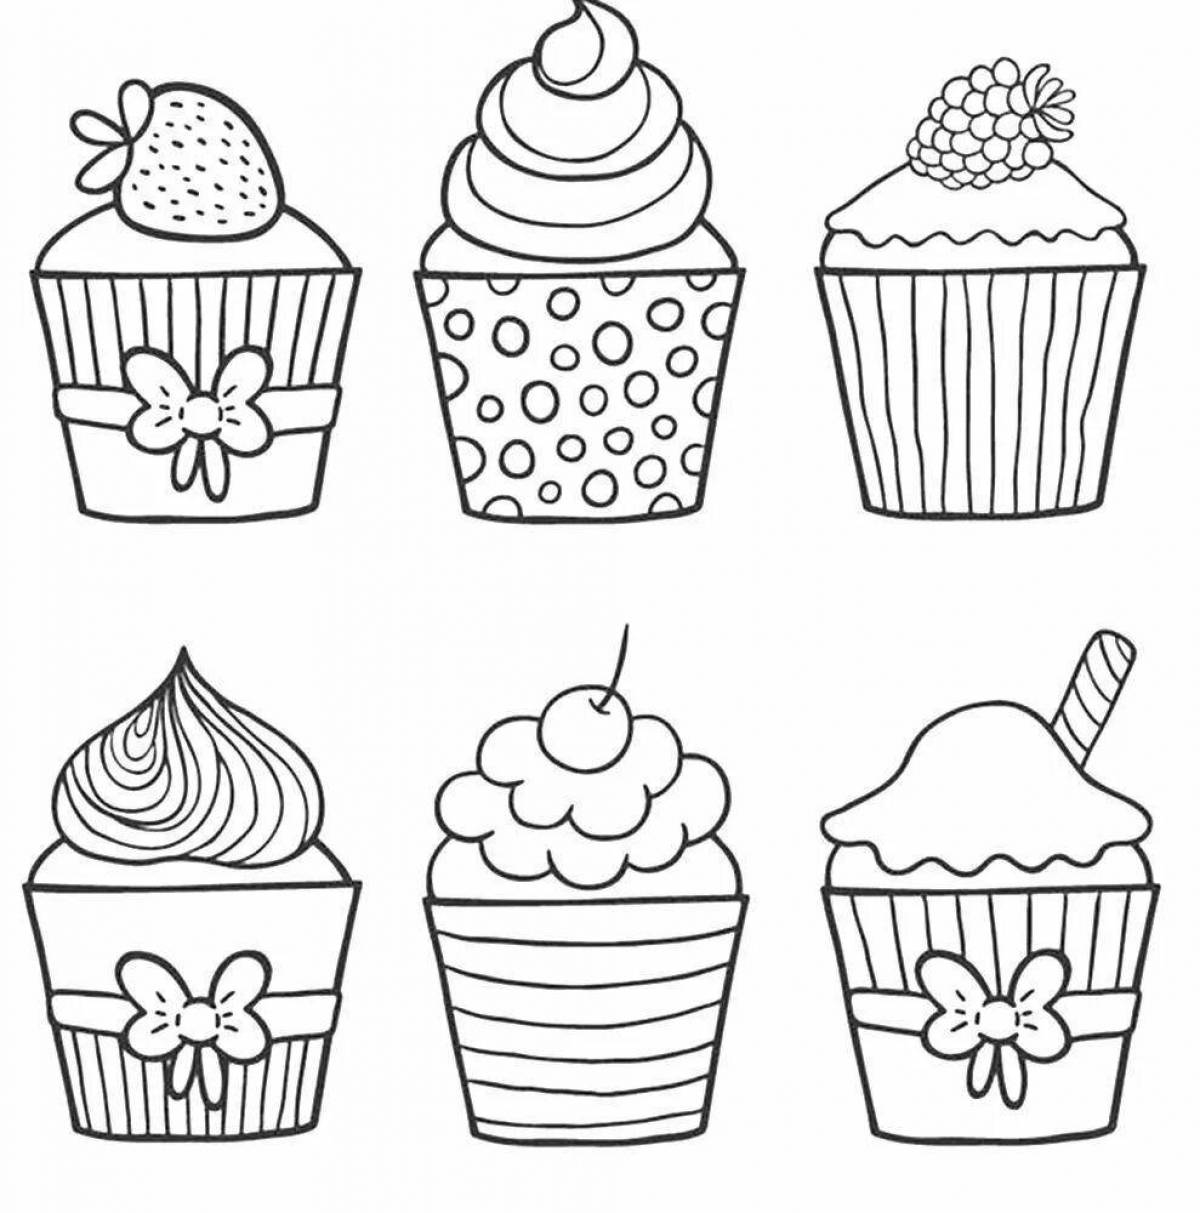 Colorful cupcake coloring page